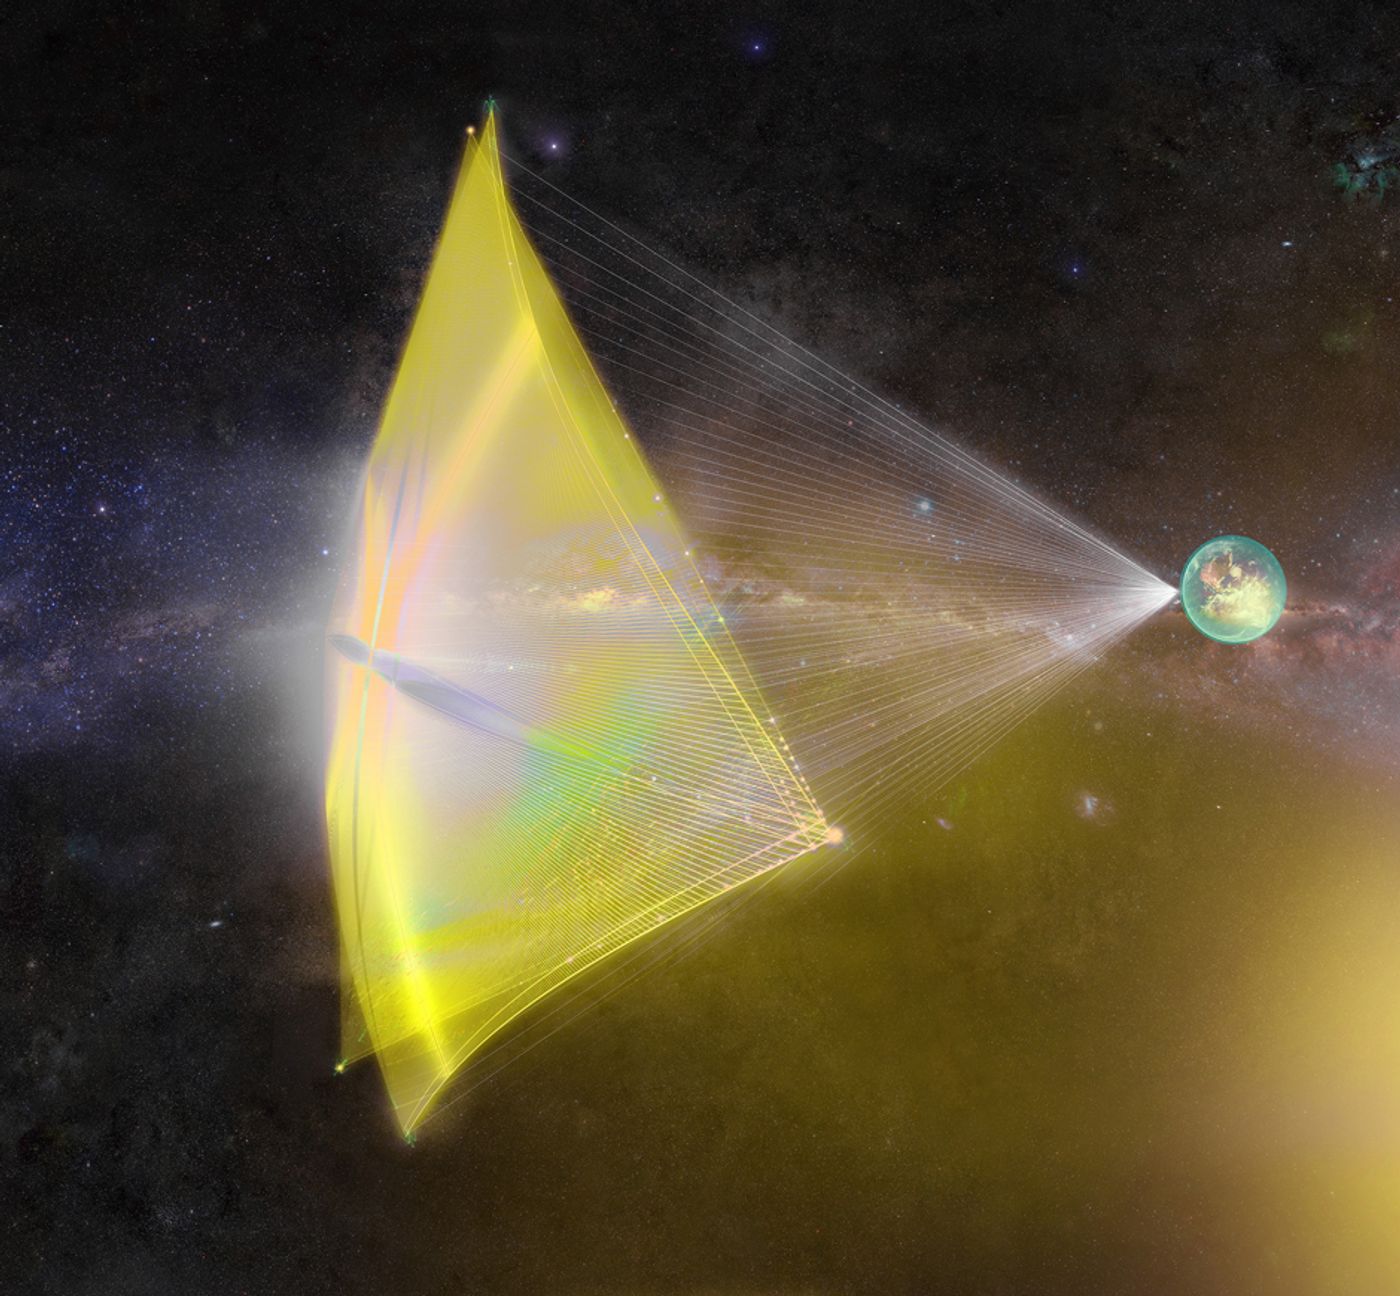 Breakthrough Starshot, an initiative that sounds like something from science fiction, may soon have some targets in mind thanks to funding from the ESO that will improve exoplanet-finding tools here on Earth.